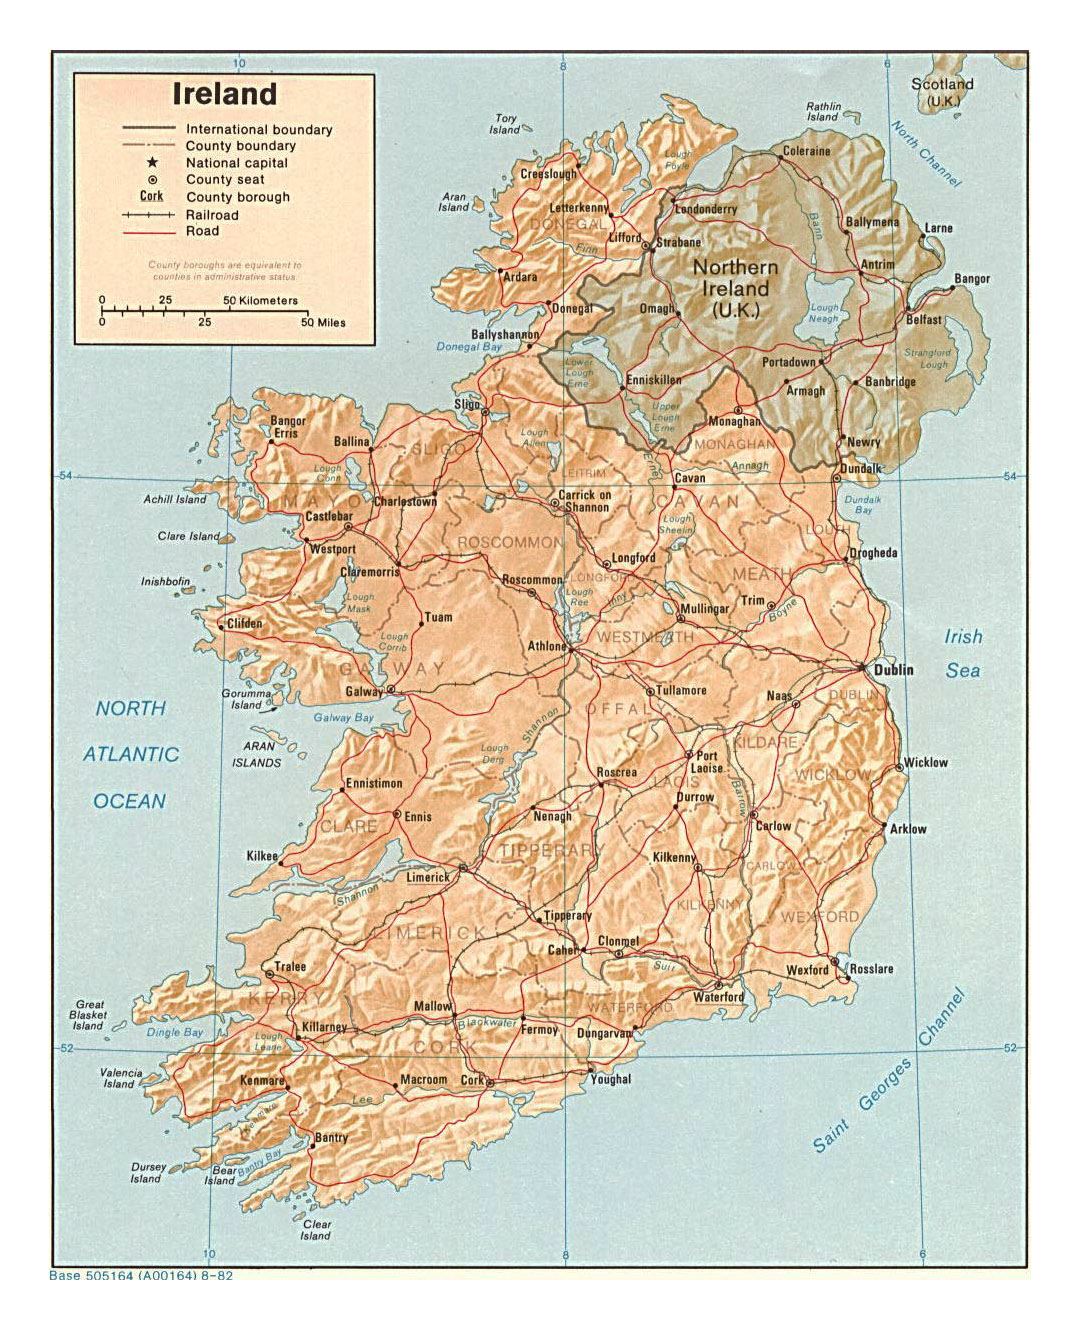 Detailed political and administrative map of Ireland with relief, roads and major cities - 1982